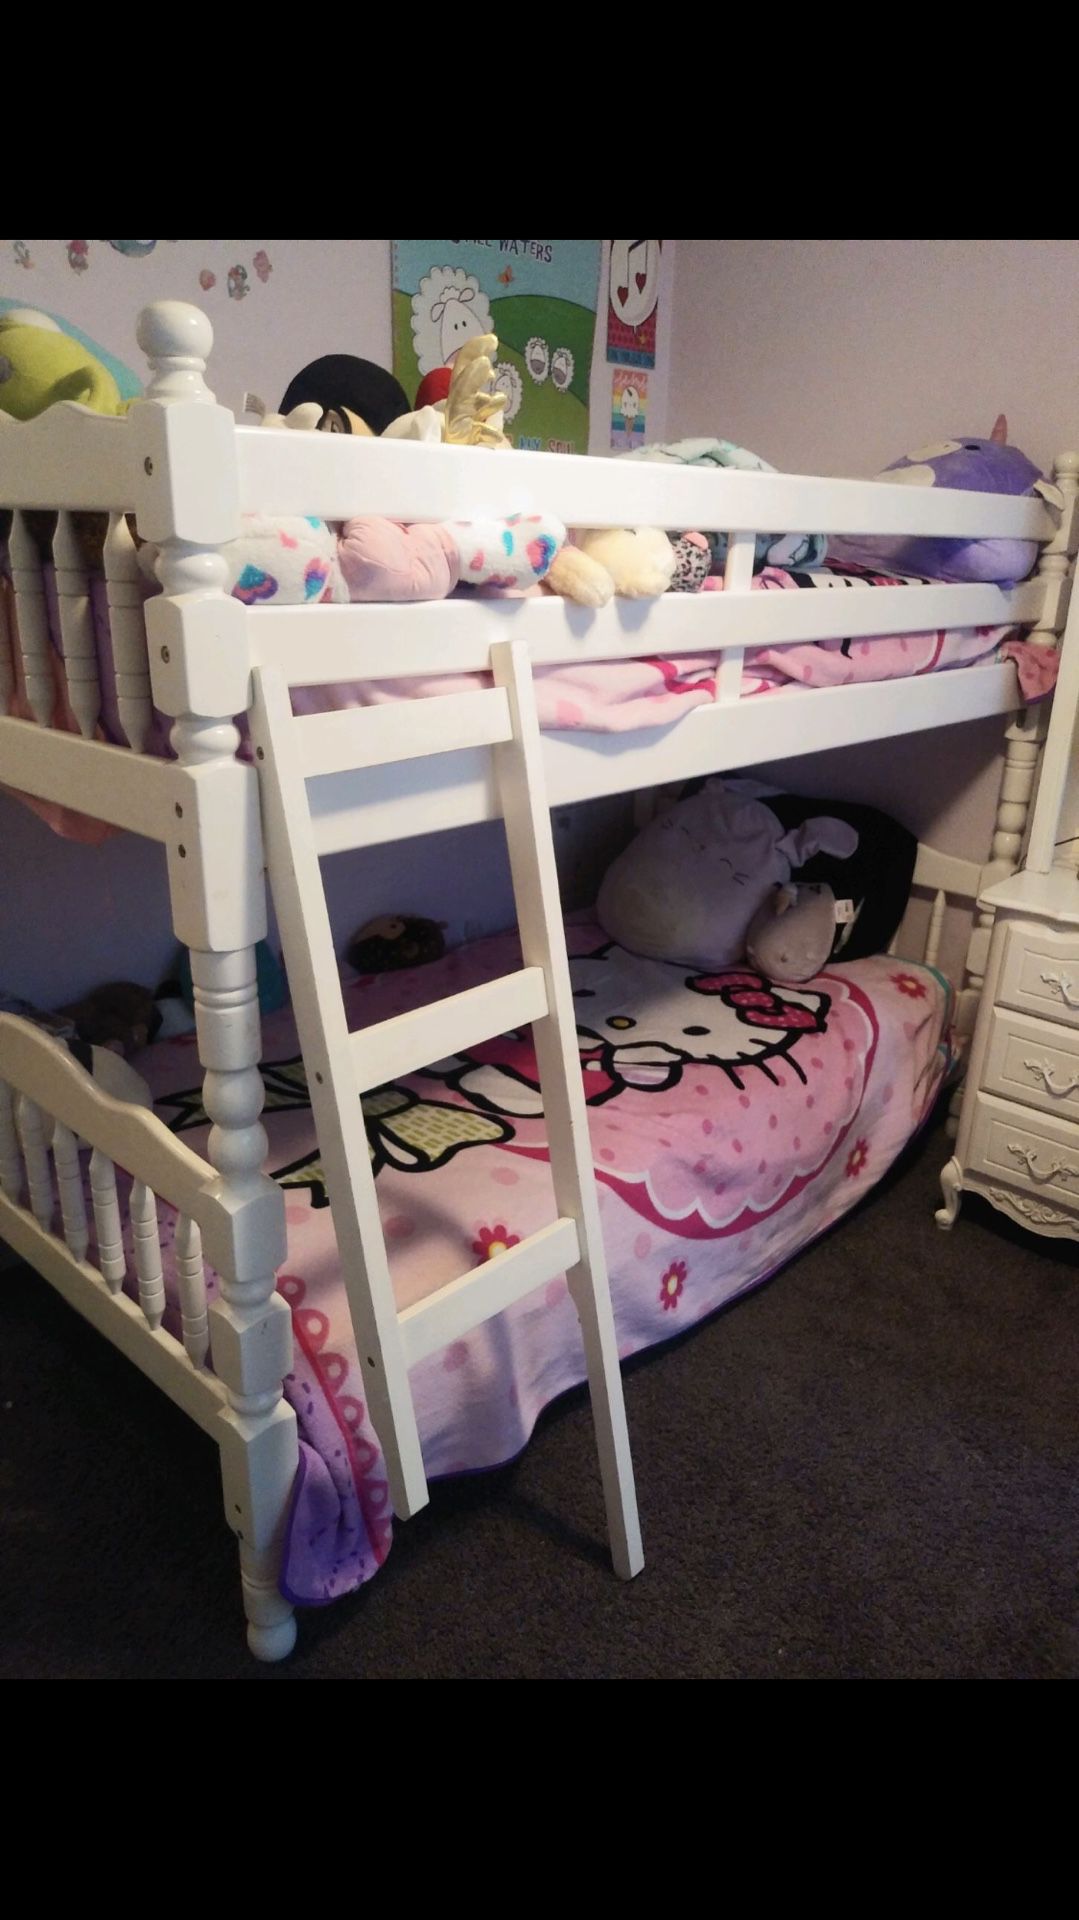 Bunk bed shabby chic great condition with all hardware $120!